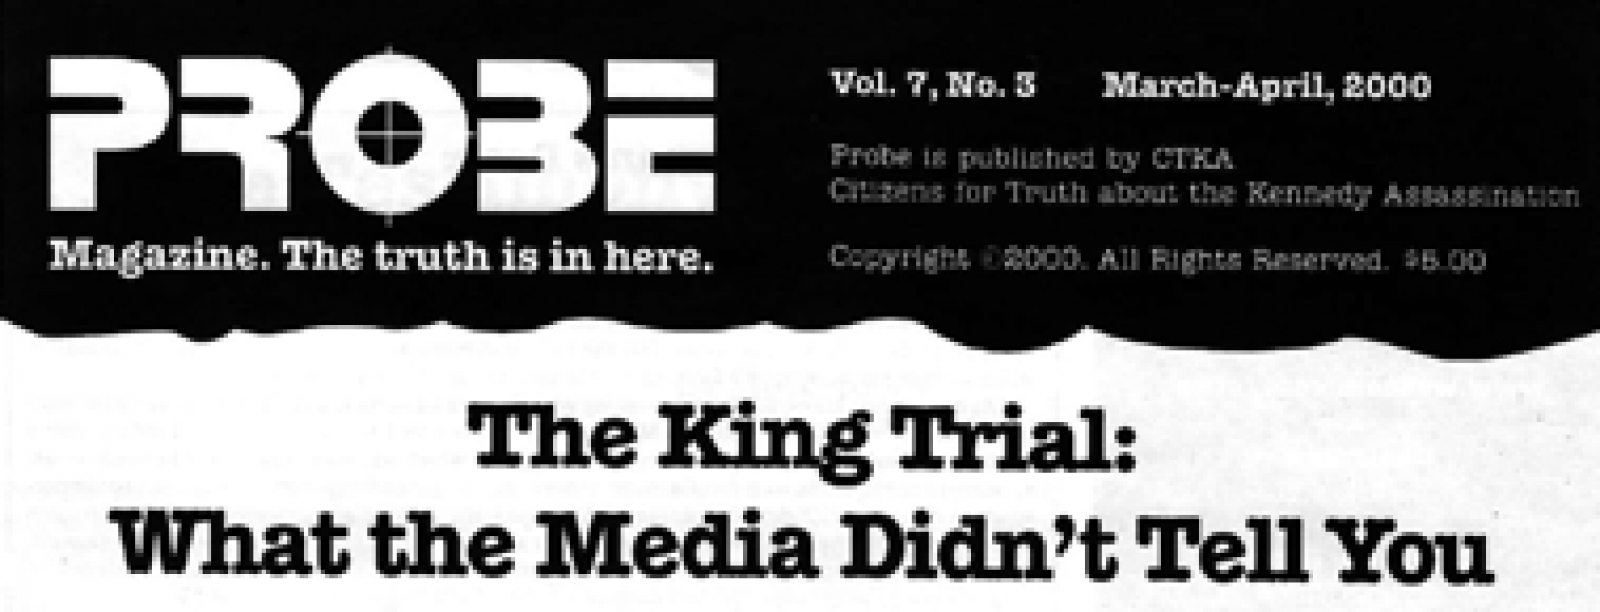 The King Trial:  What the Media Didn't Tell You